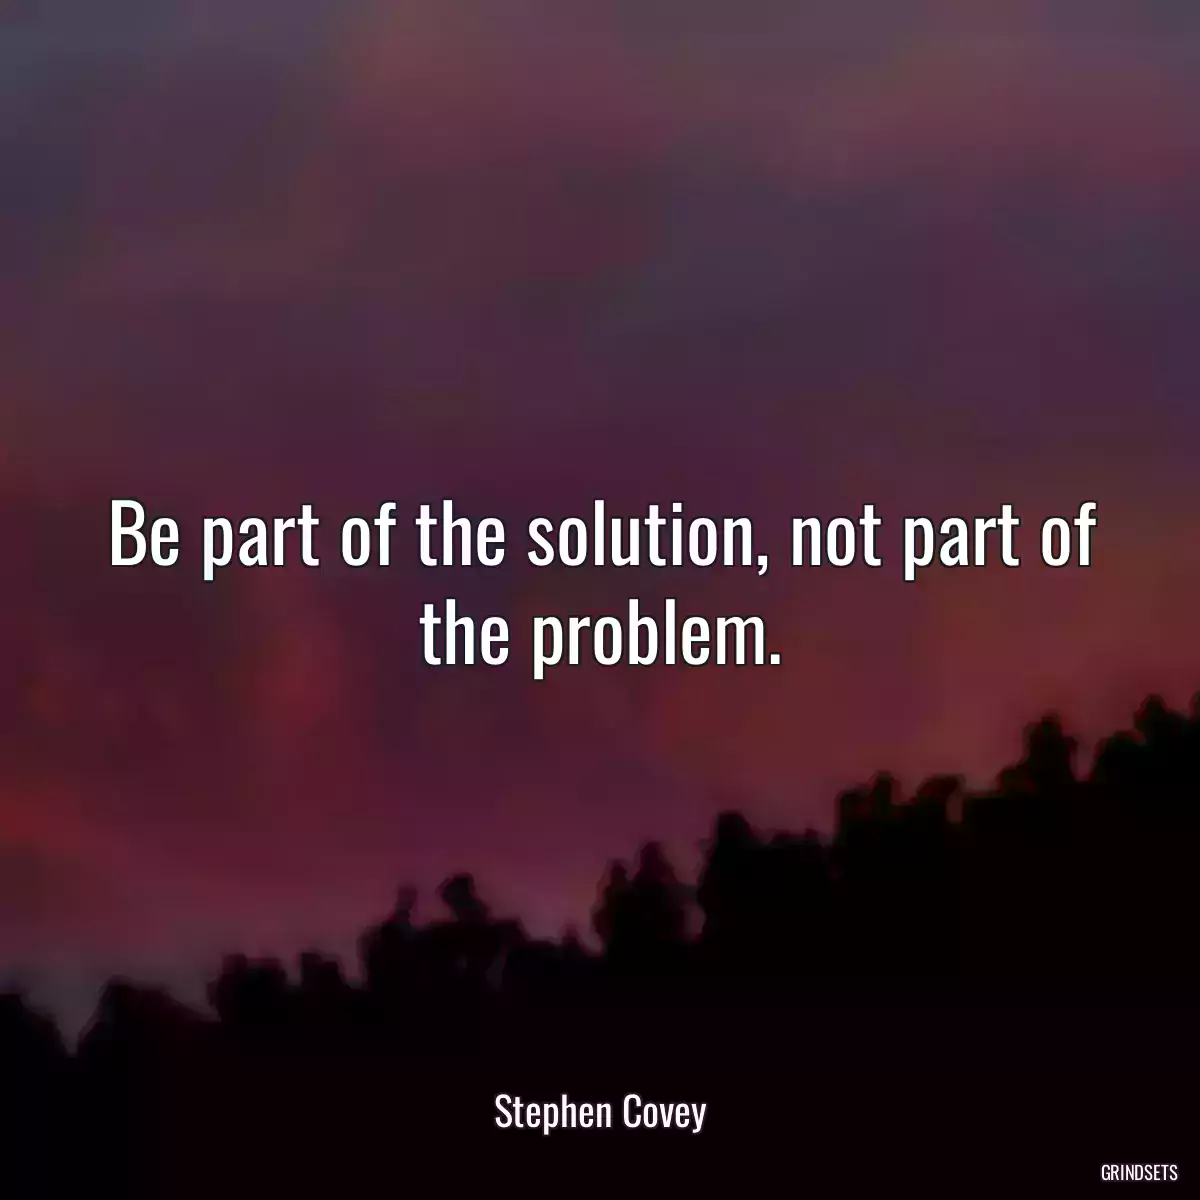 Be part of the solution, not part of the problem.